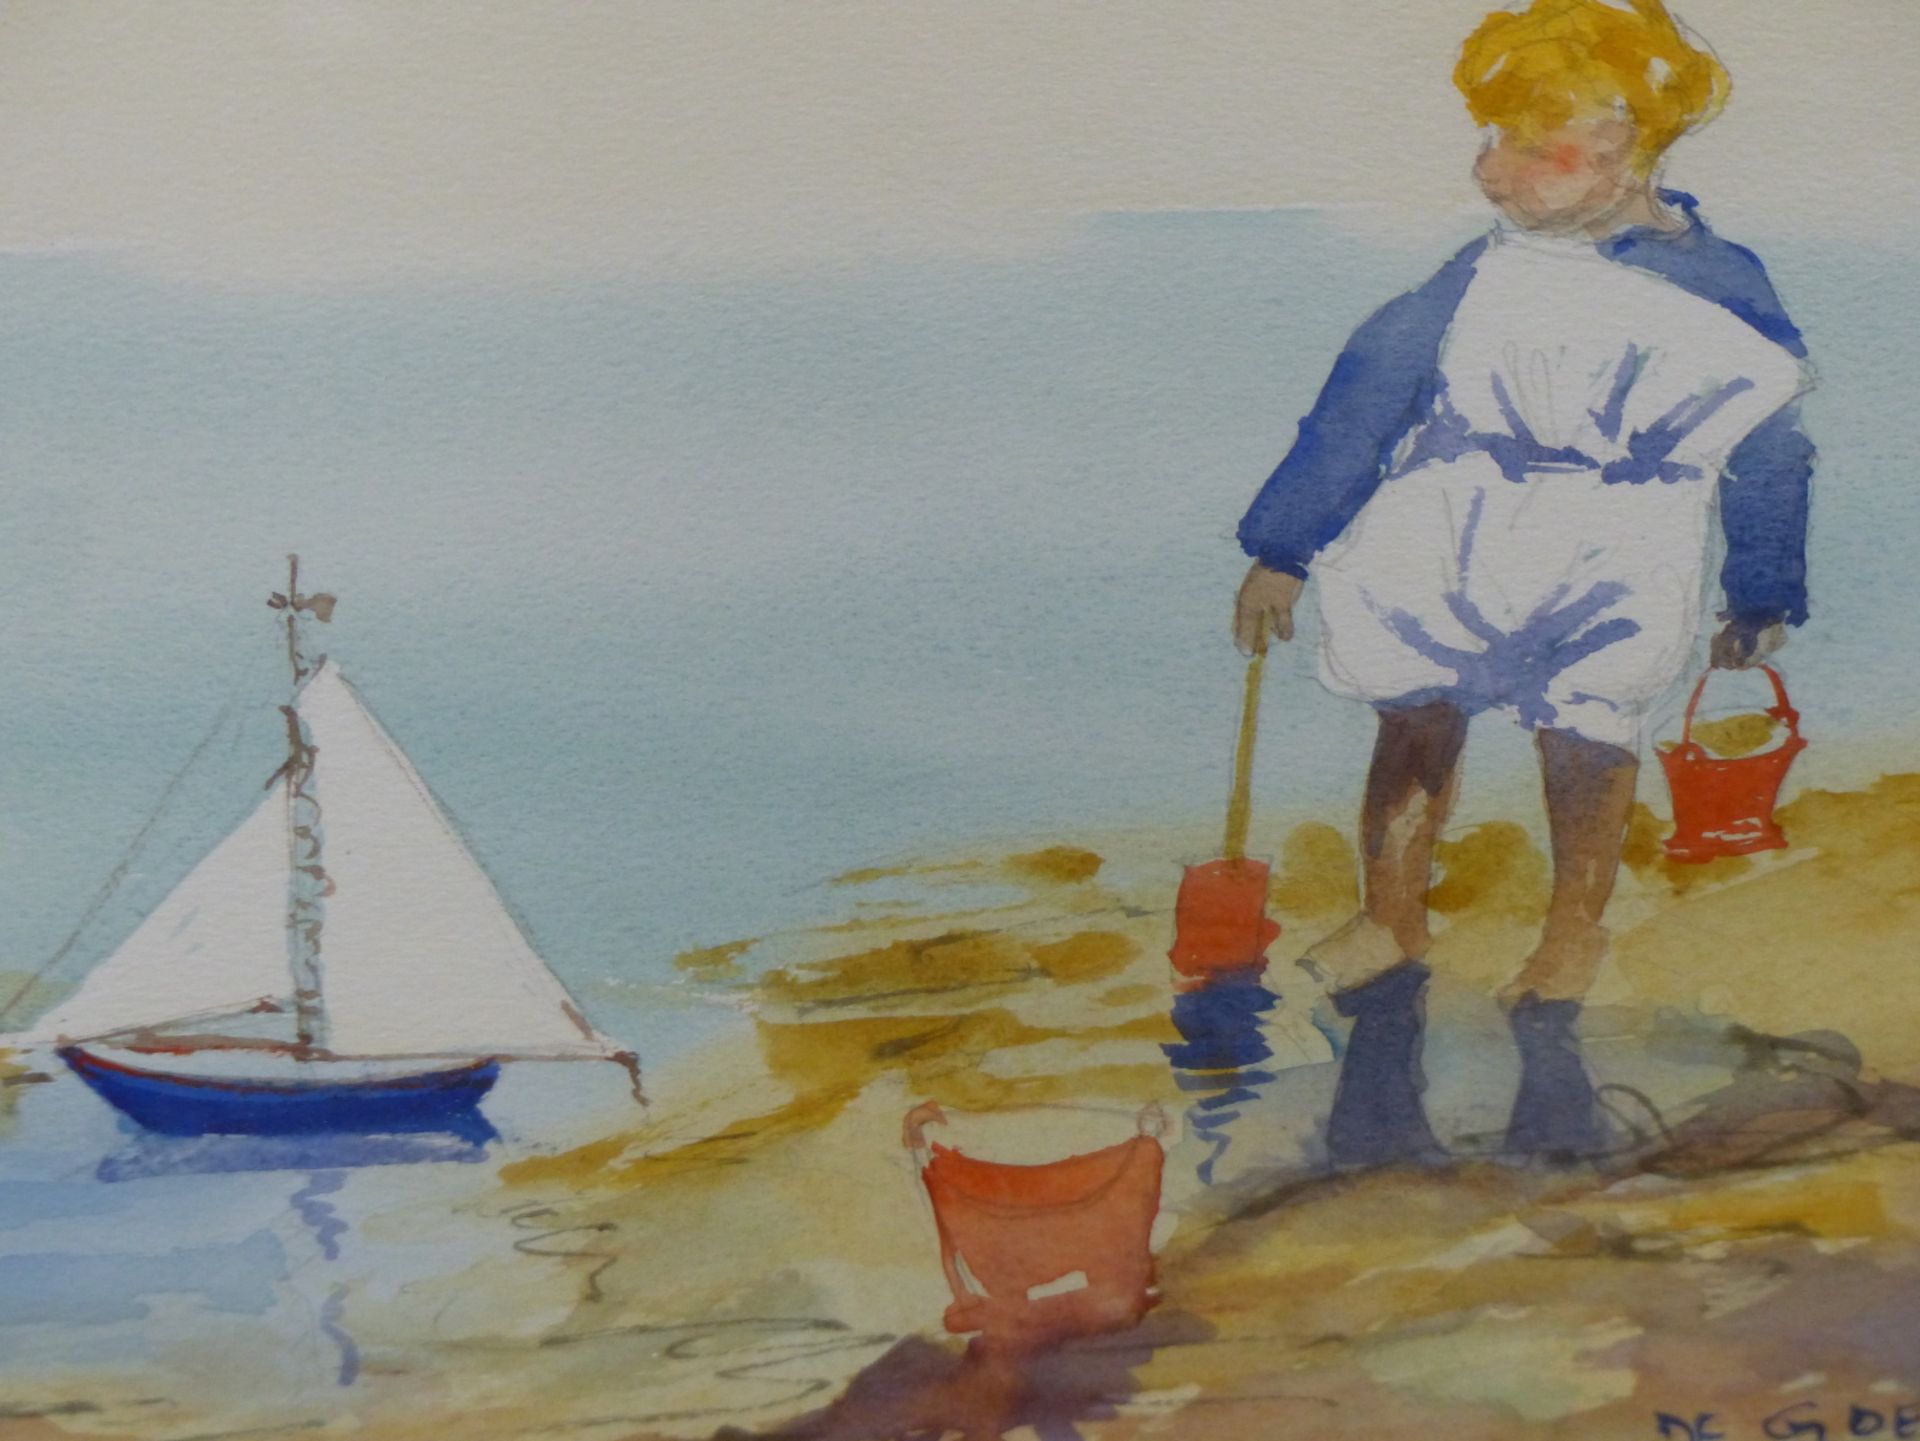 PAULINE BROWN (20TH CENTURY), CHILDREN PLAYING ON A BEACH, SIGNED, OIL ON BOARD, 24 X 19CM, TOGETHER - Image 10 of 12